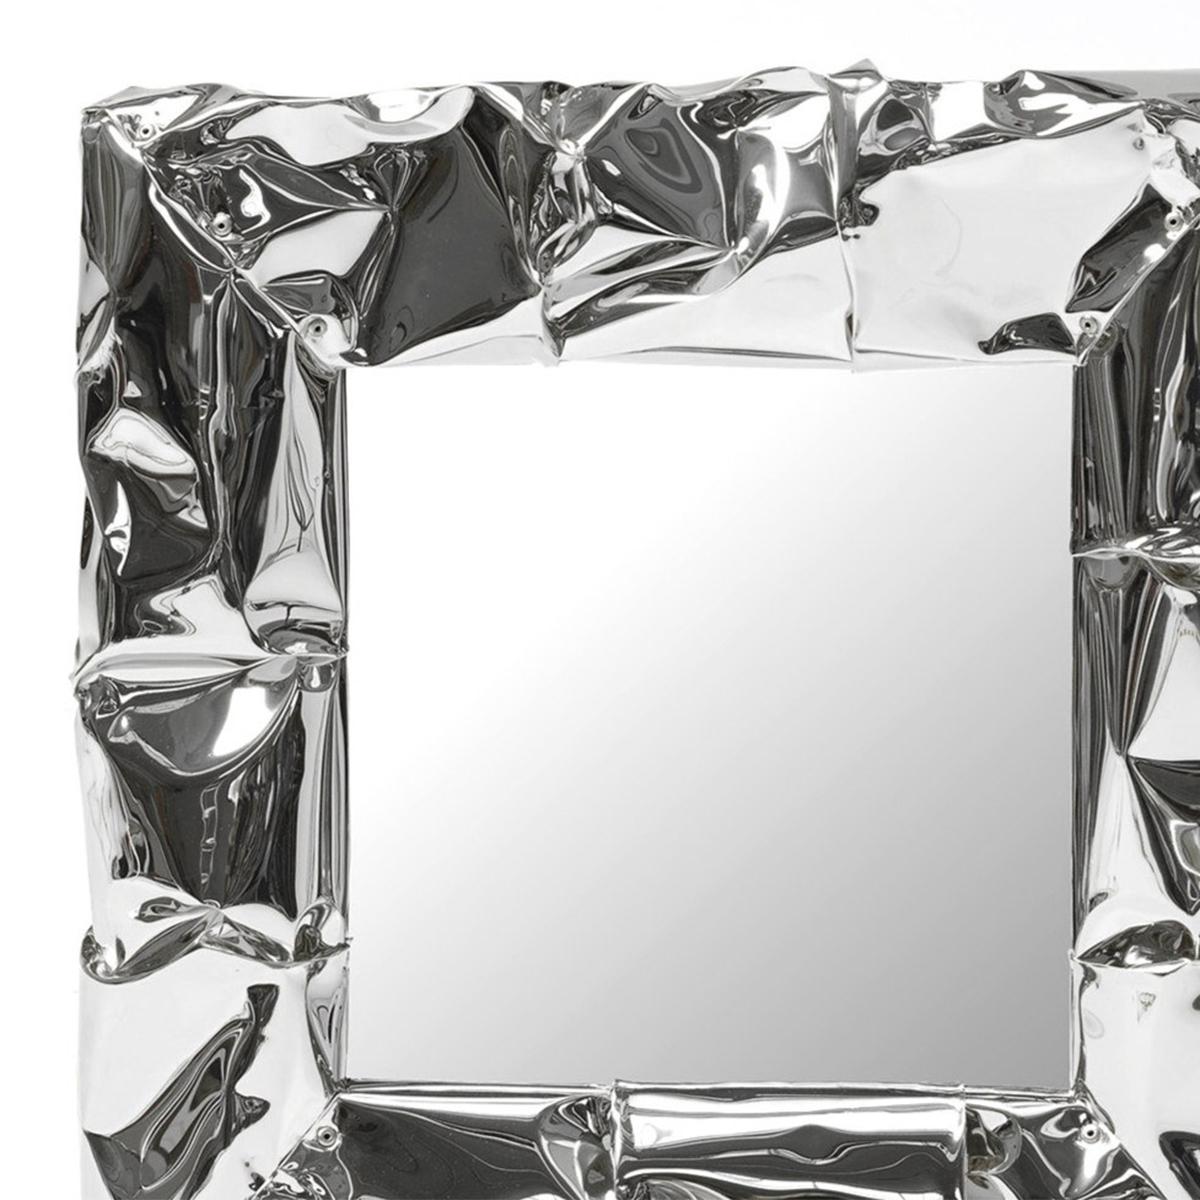 Mirror bumpy square chrome with hand-strained polished
aluminum frame in chrome finish. With mirror glass. Measures: L 50 x D 8 x H 50cm.
Also available in gold finish.